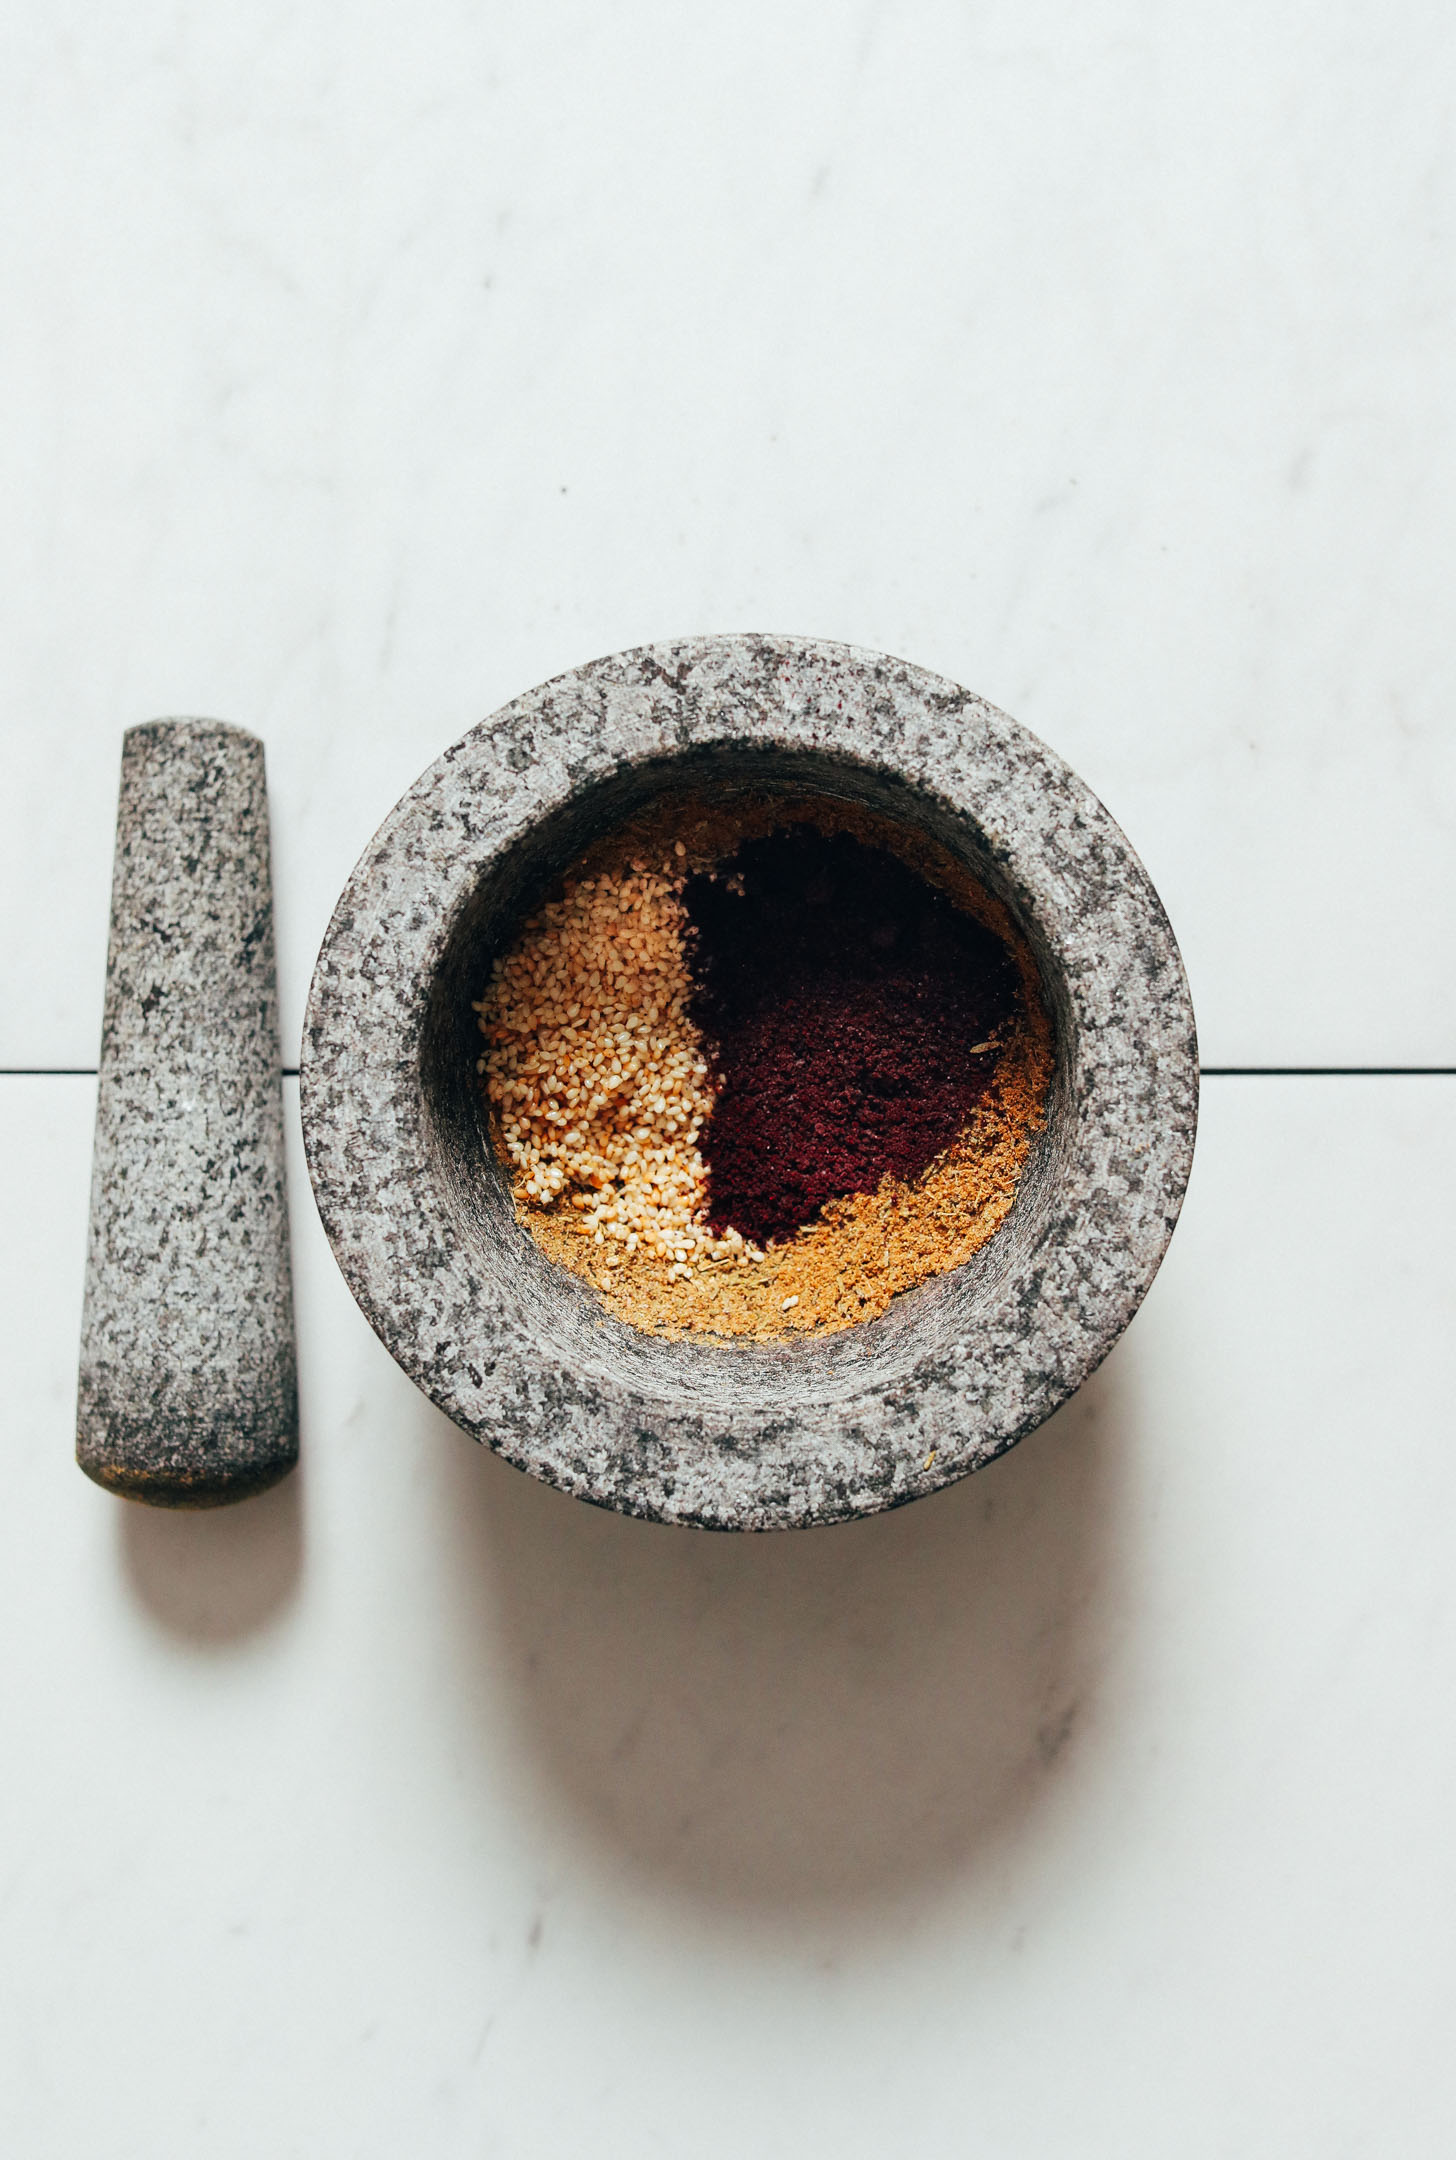 Mortar and pestle filled with ingredients for making za'atar